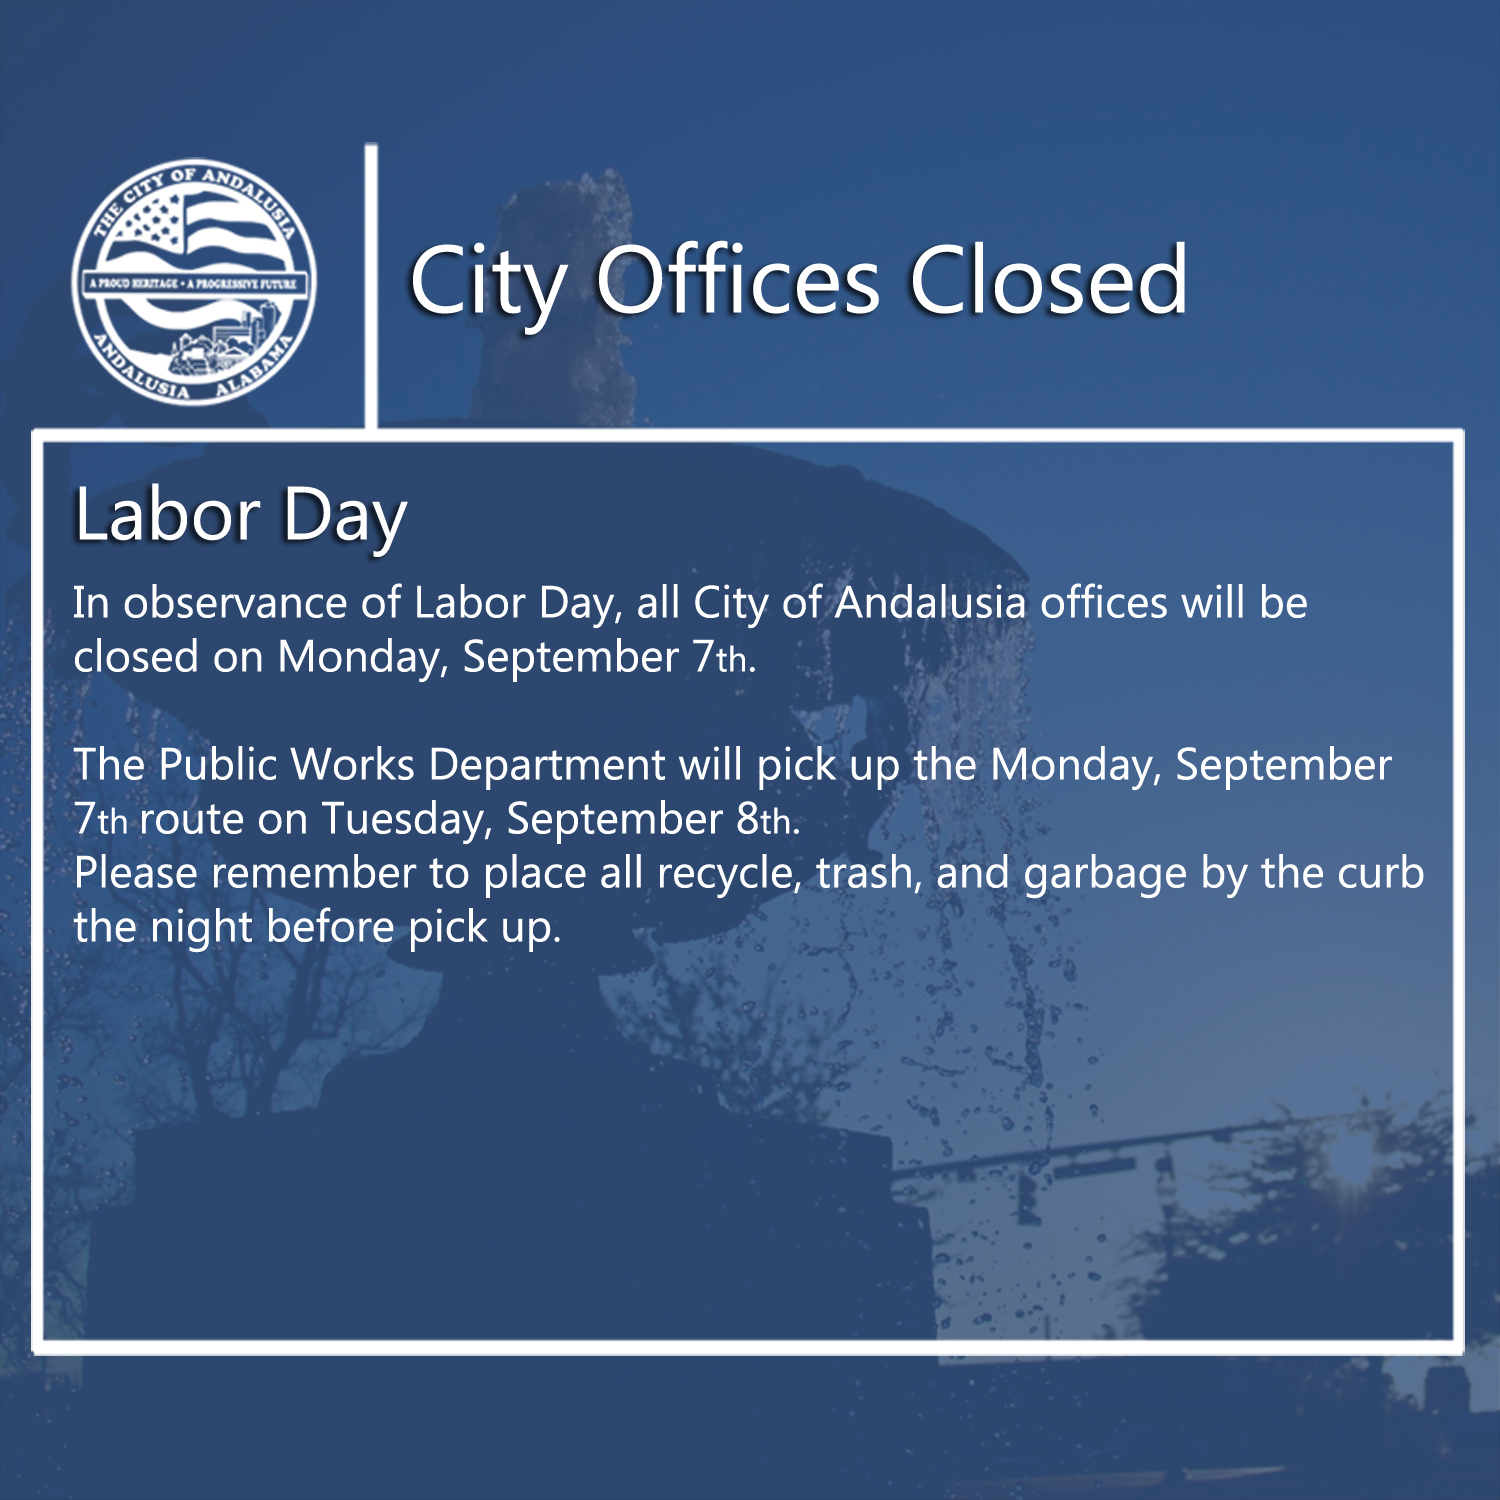 Facebook City Offices Closed Sept. 7th